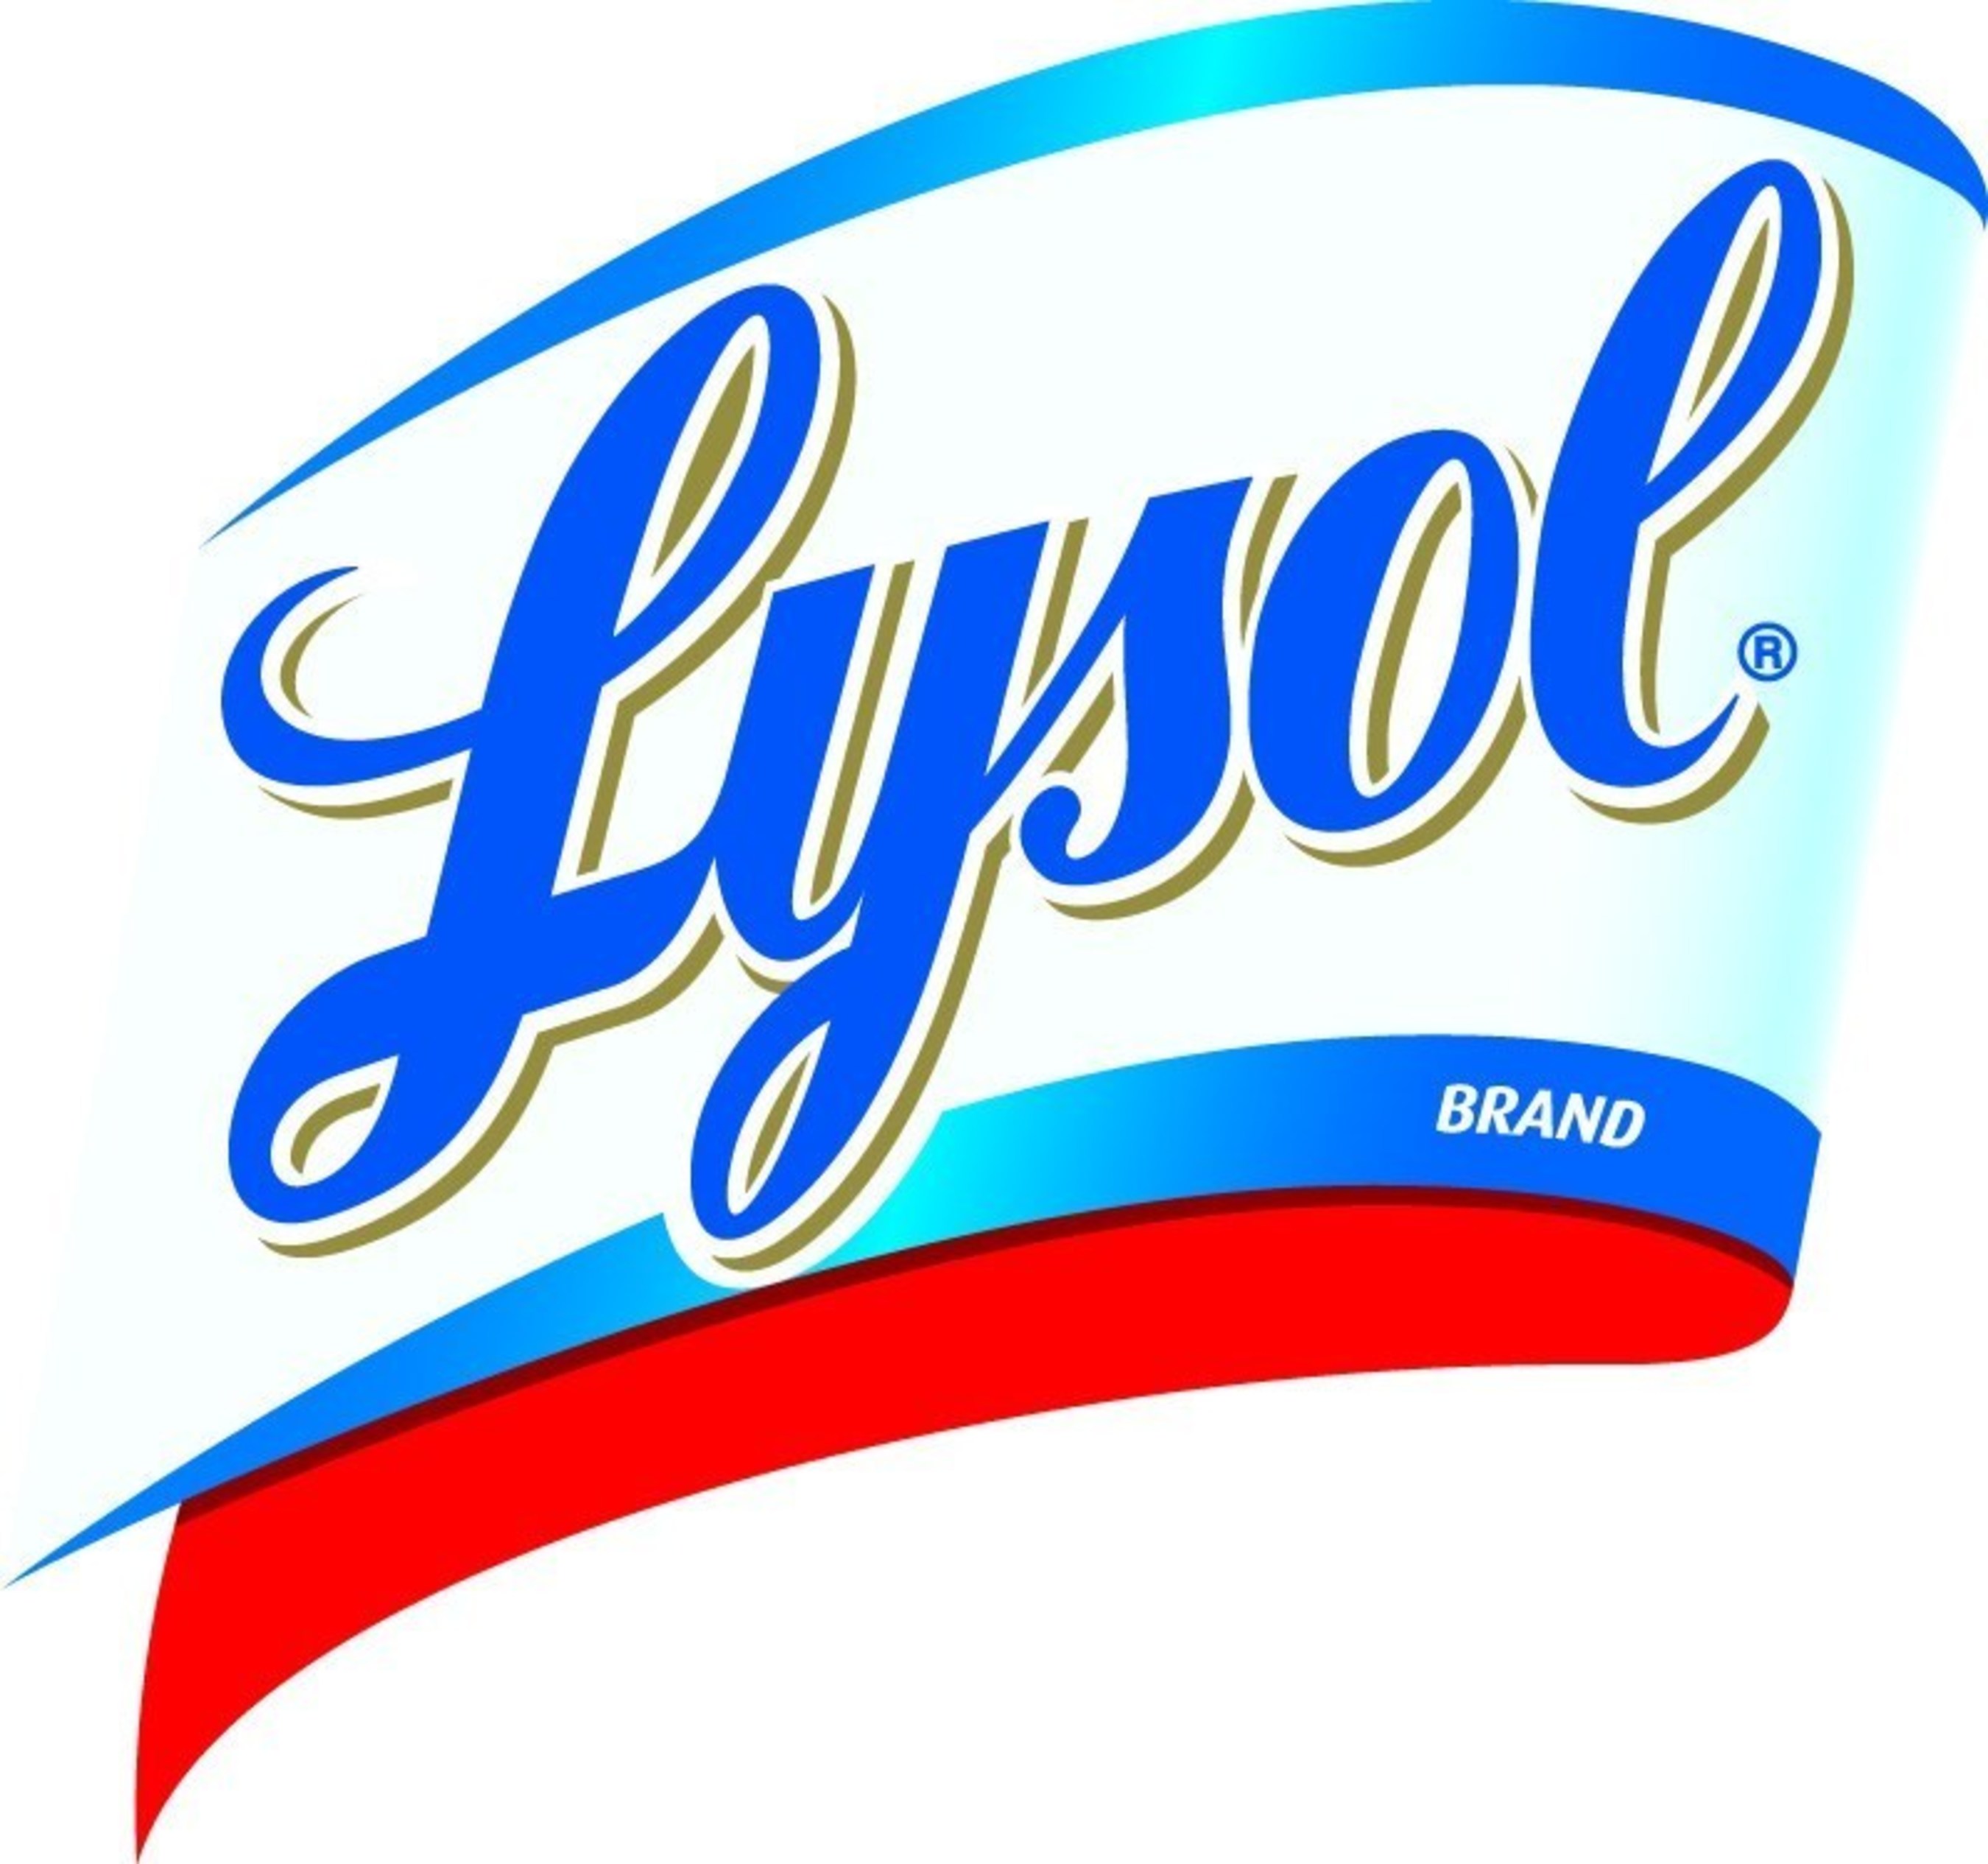 Lysol offers easy healthy habit practices to help reduce the spread of cold and flu